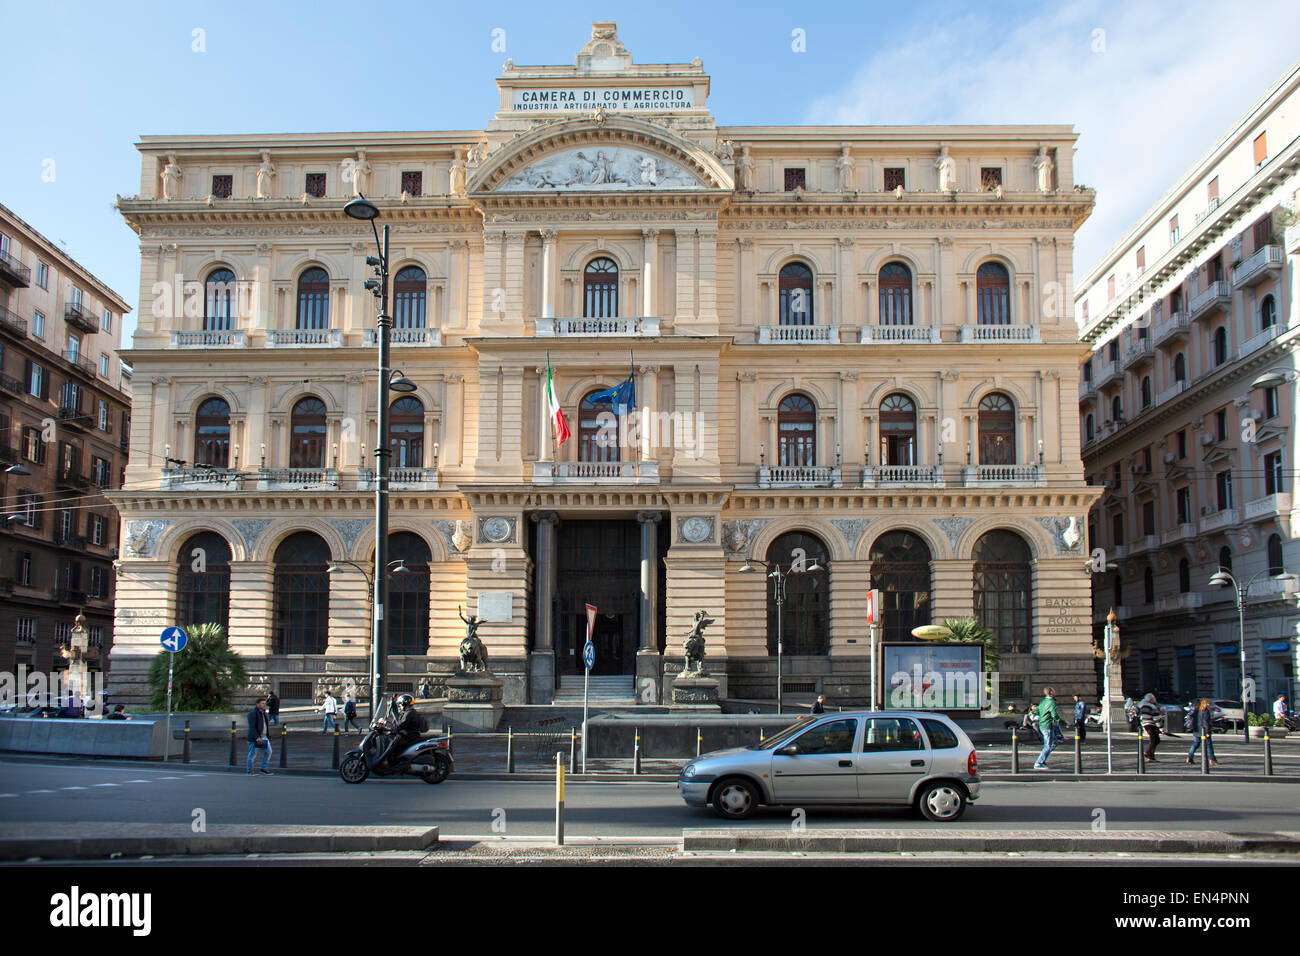 Chamber of Commerce in naples Stock Photo